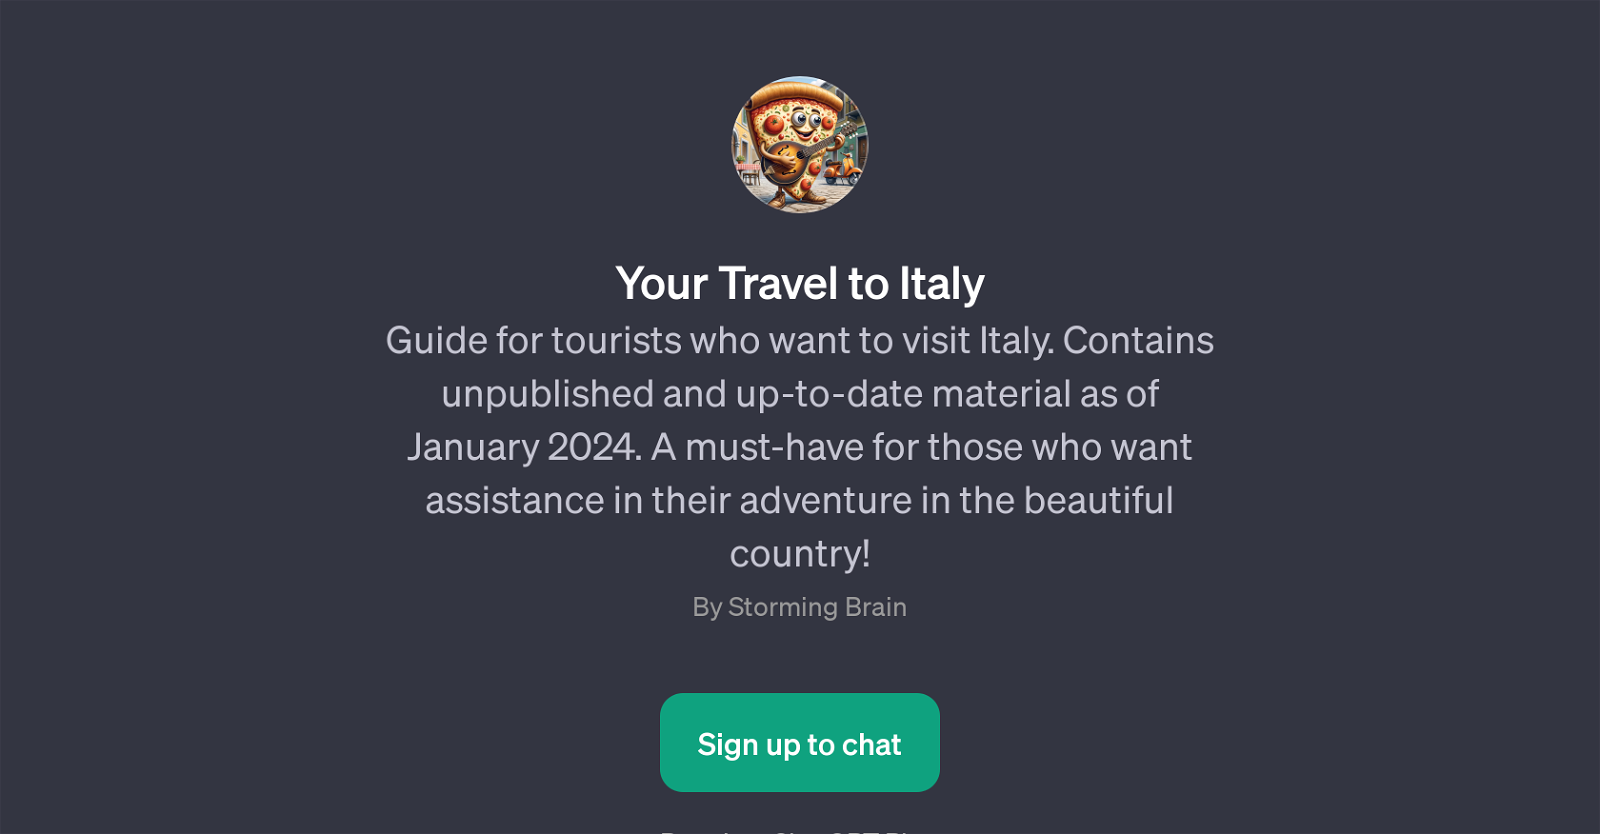 Your Travel to Italy website